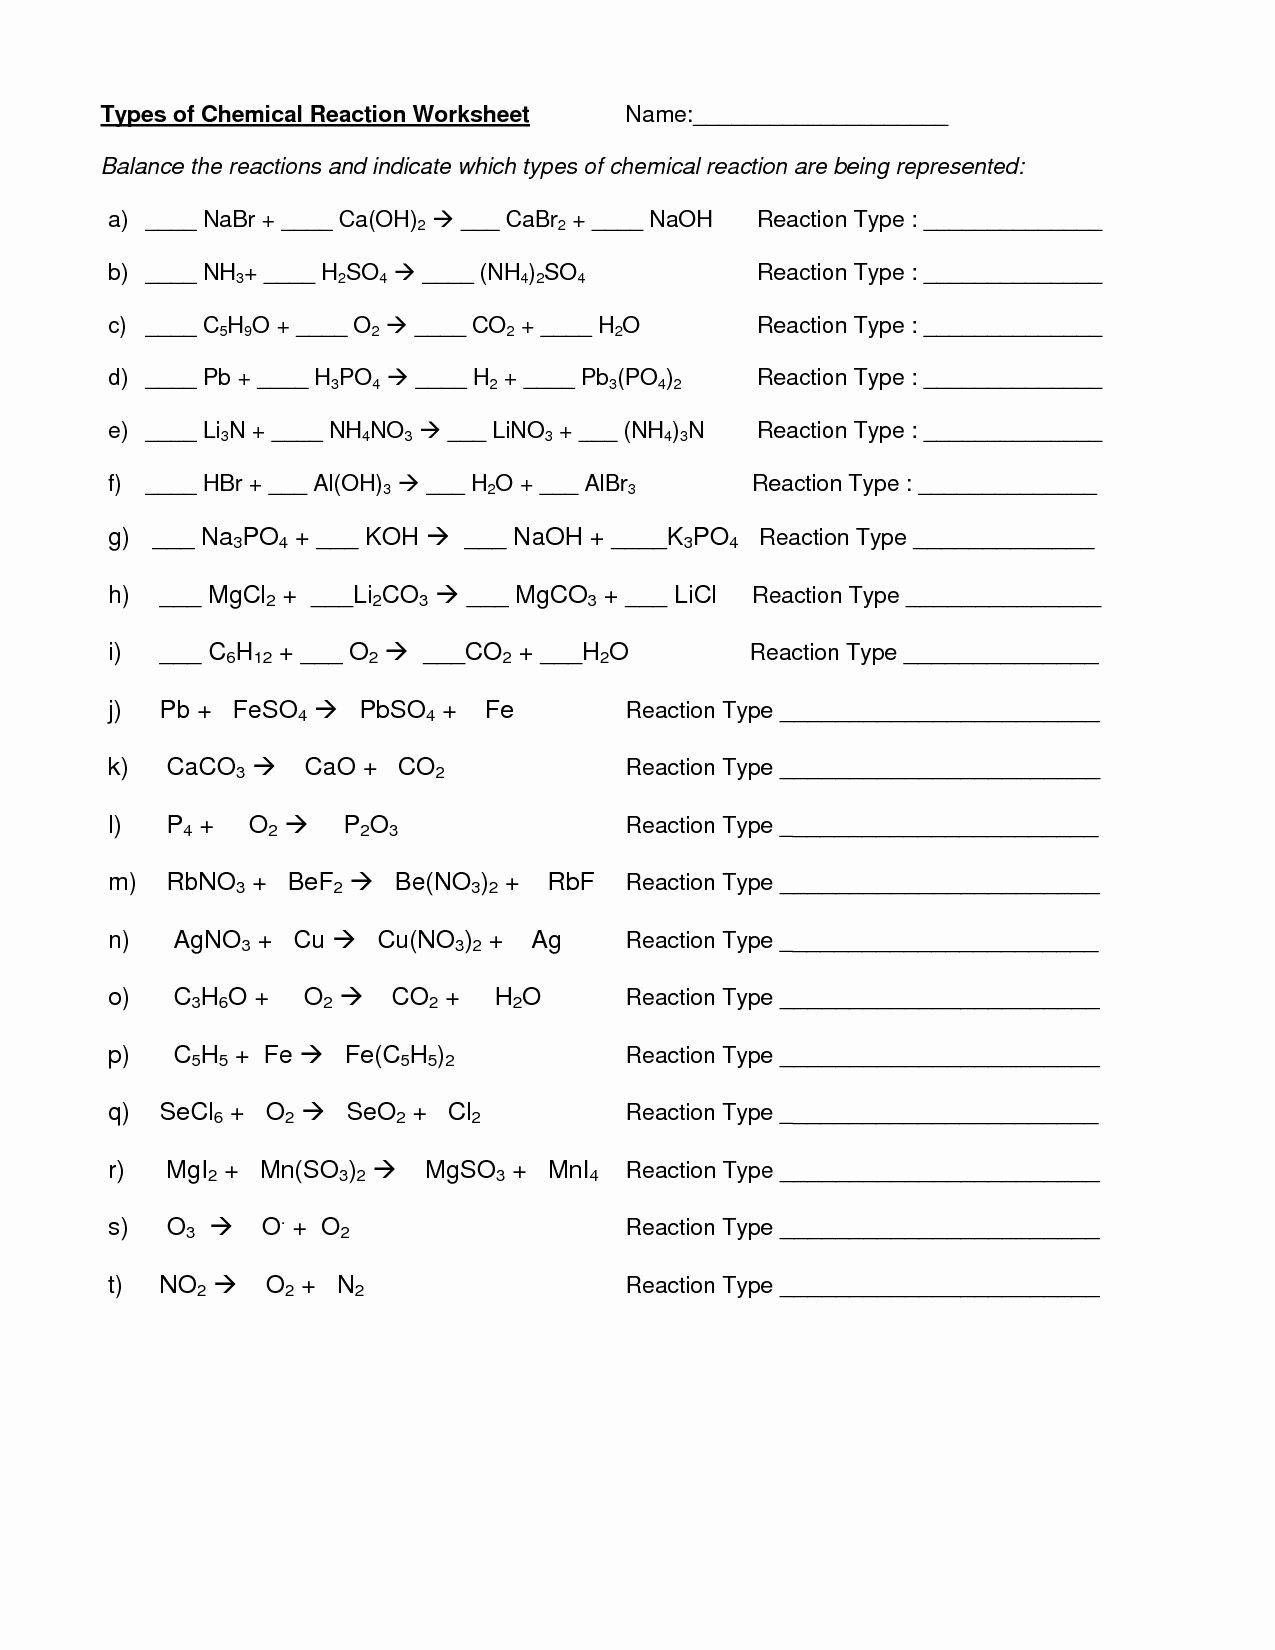 Chemical Reaction Type Worksheet 50 Classifying Chemical Reactions Worksheet Answers In 2020